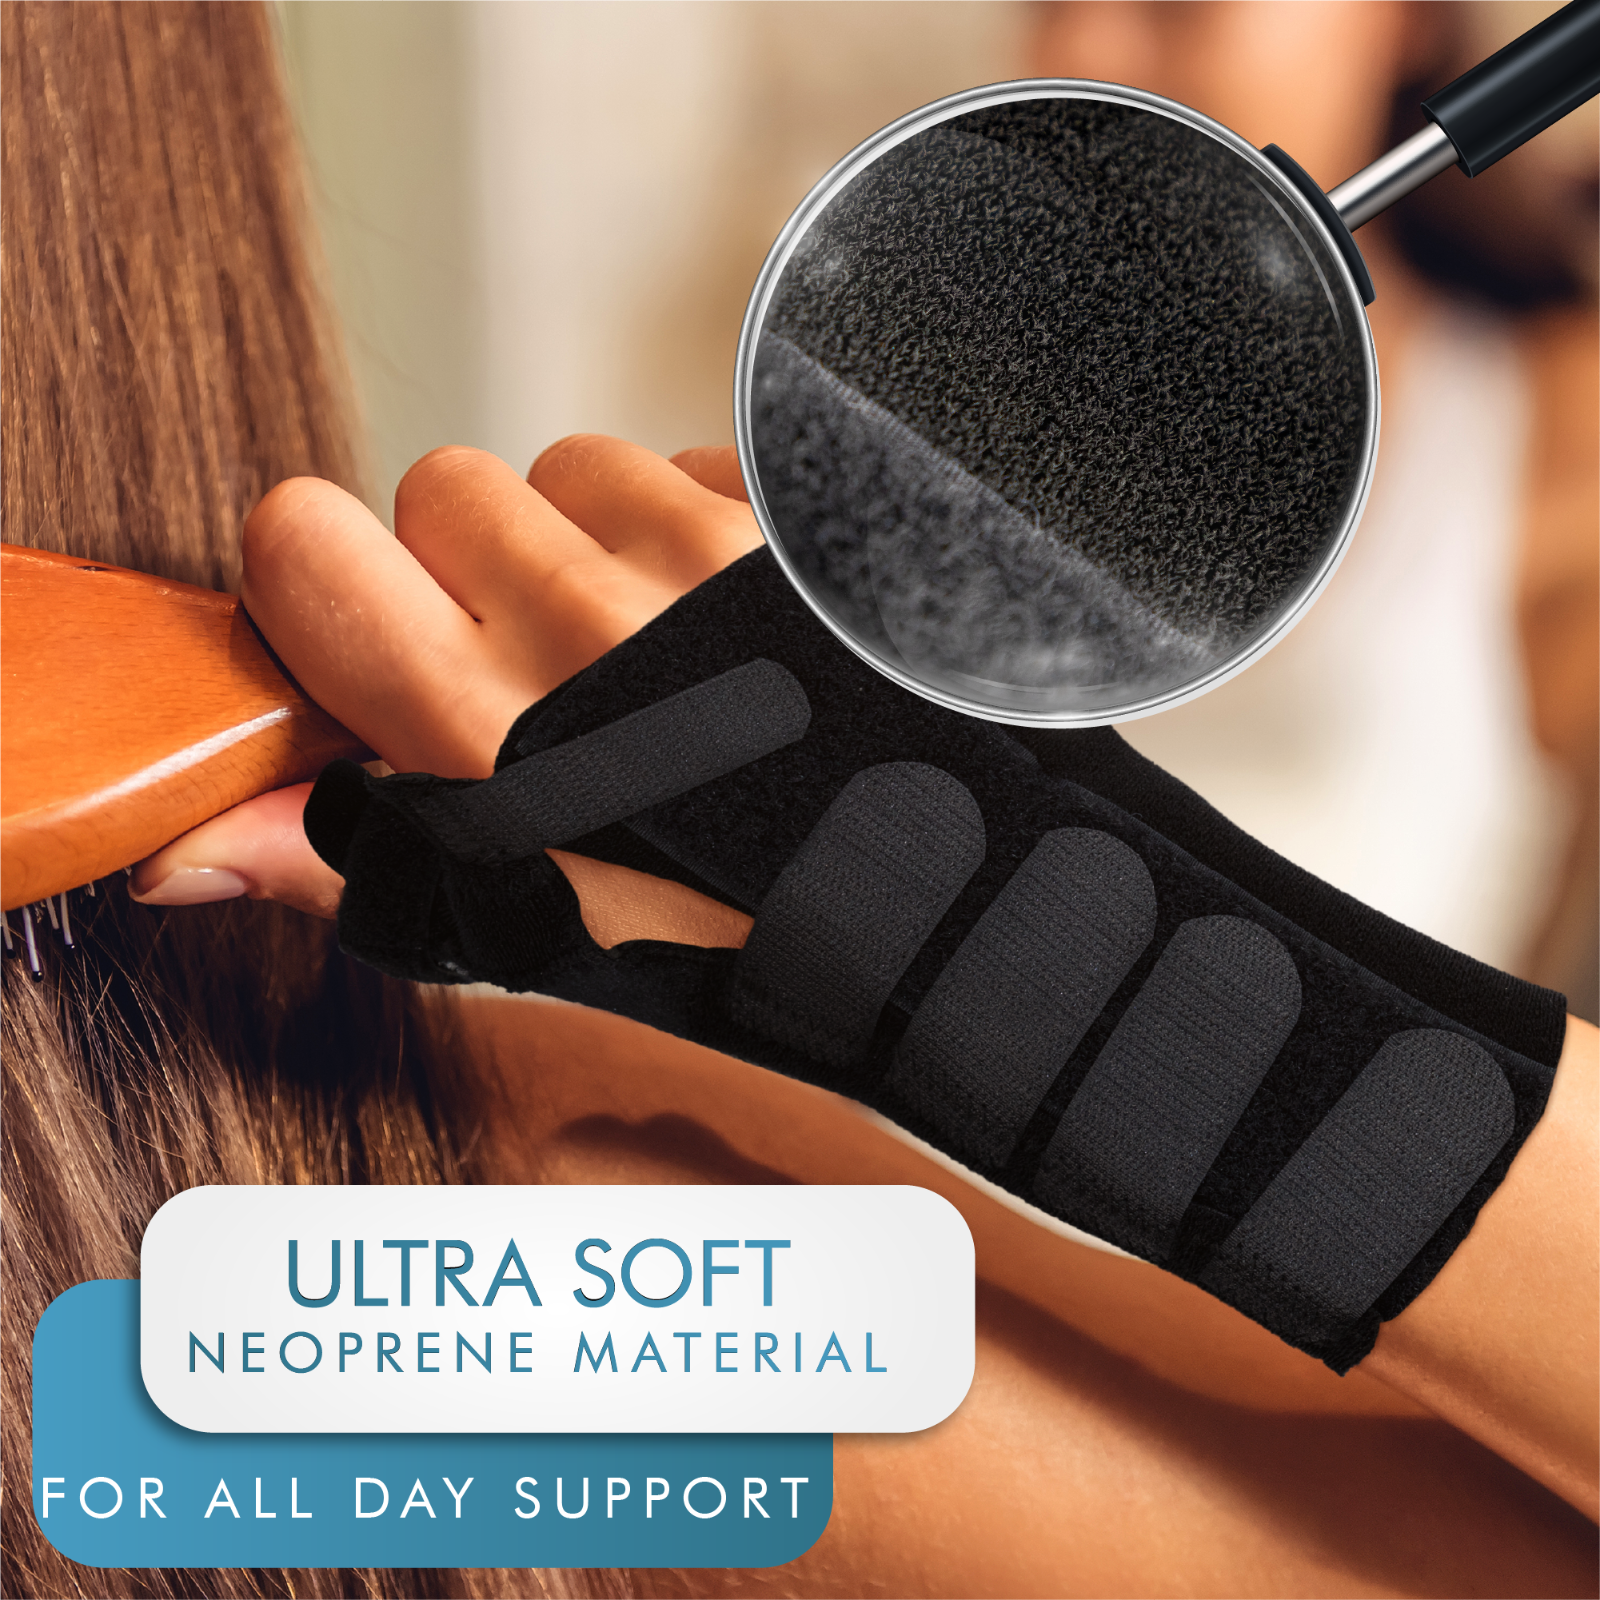 Orthopaedic Wrist Splint for Carpal Tunnel Support Brace Breathable – Misk  Bliss